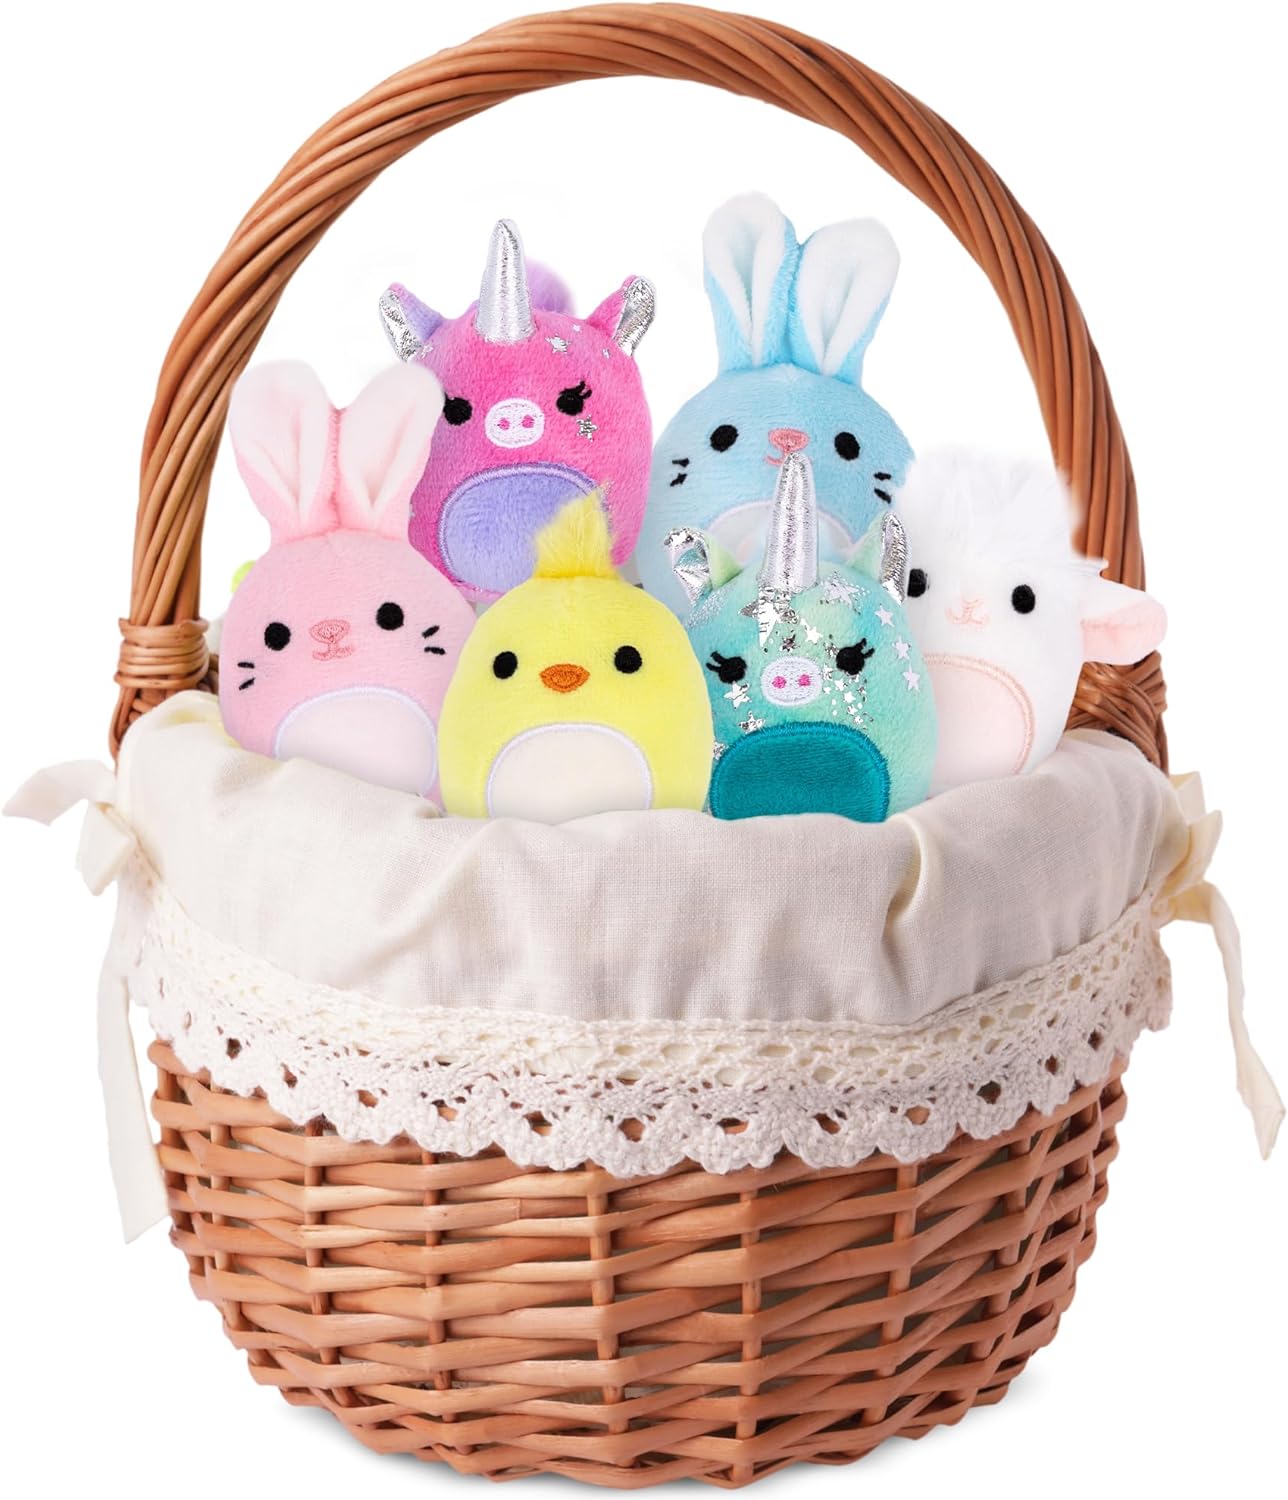 ArtCreativity Bulk Easter Stuffed Animals - Set of 6 Plush Easter Toys - Stuffed Animals for Kids in Pastel Colors - Chick, Bunny, Unicorn, and Lamb Designs - Easter Basket Stuffers for Ages 3 and Up